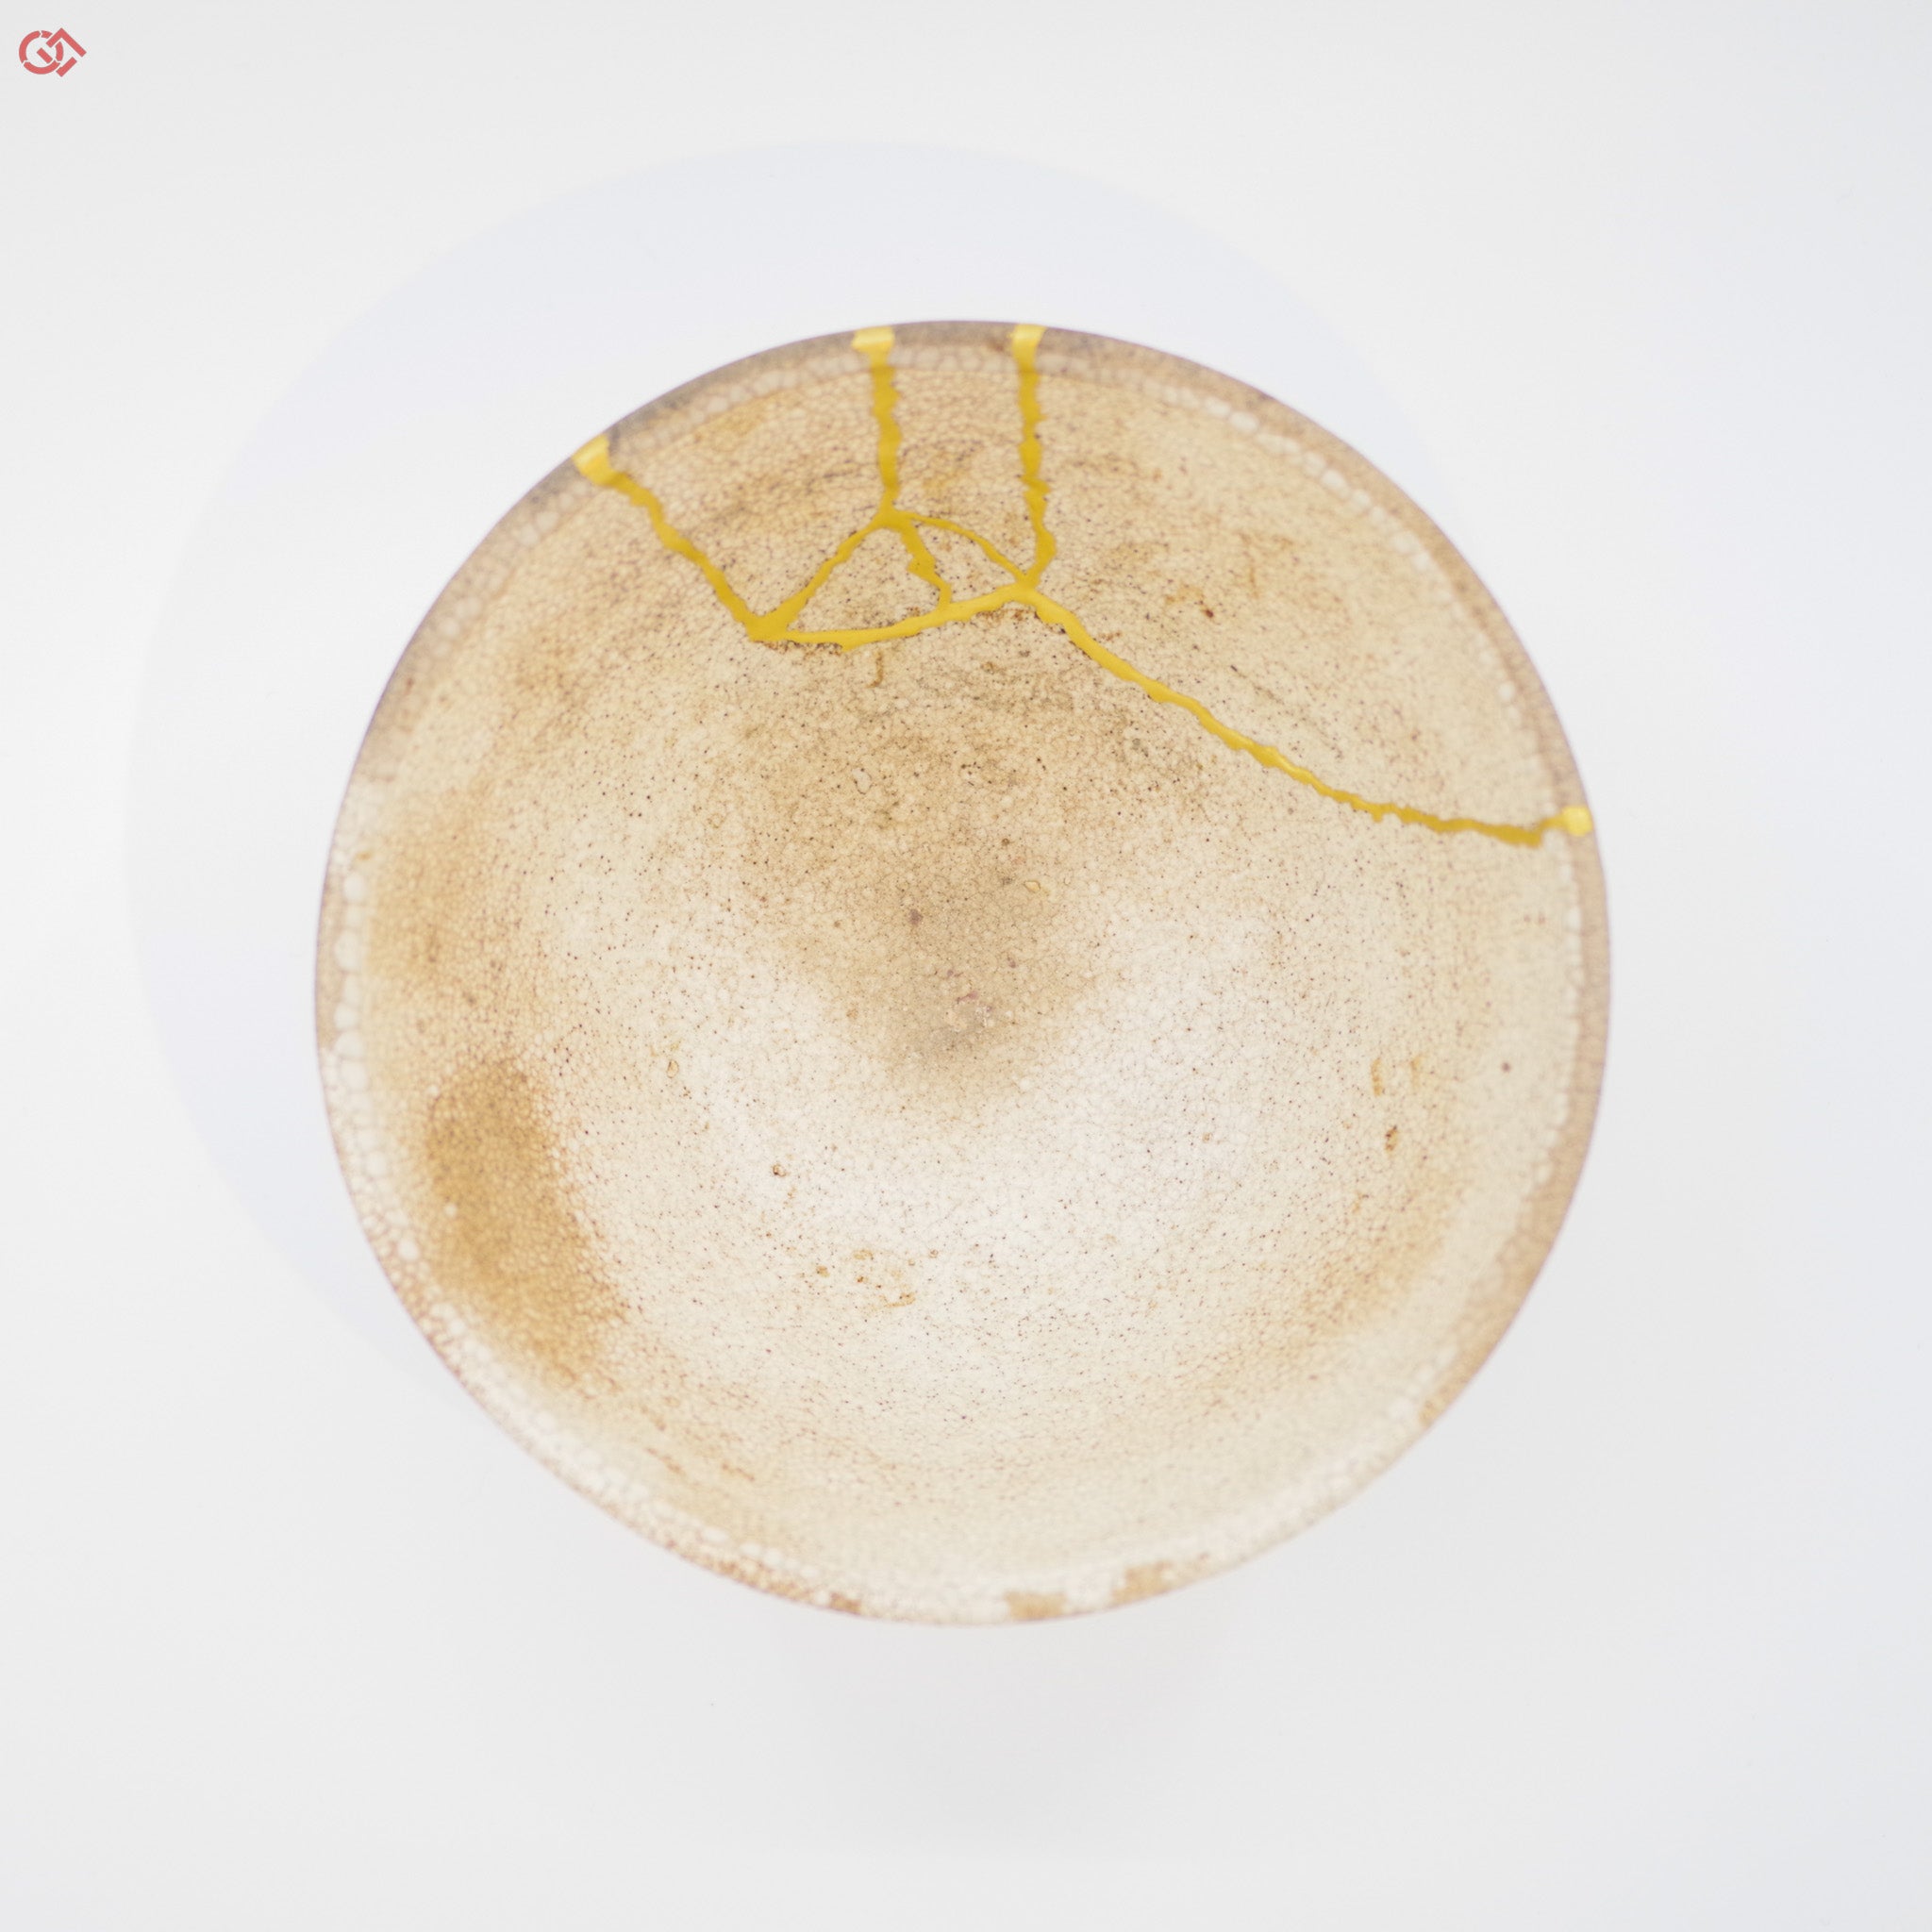 Photo of authentic Kintsugi art from above